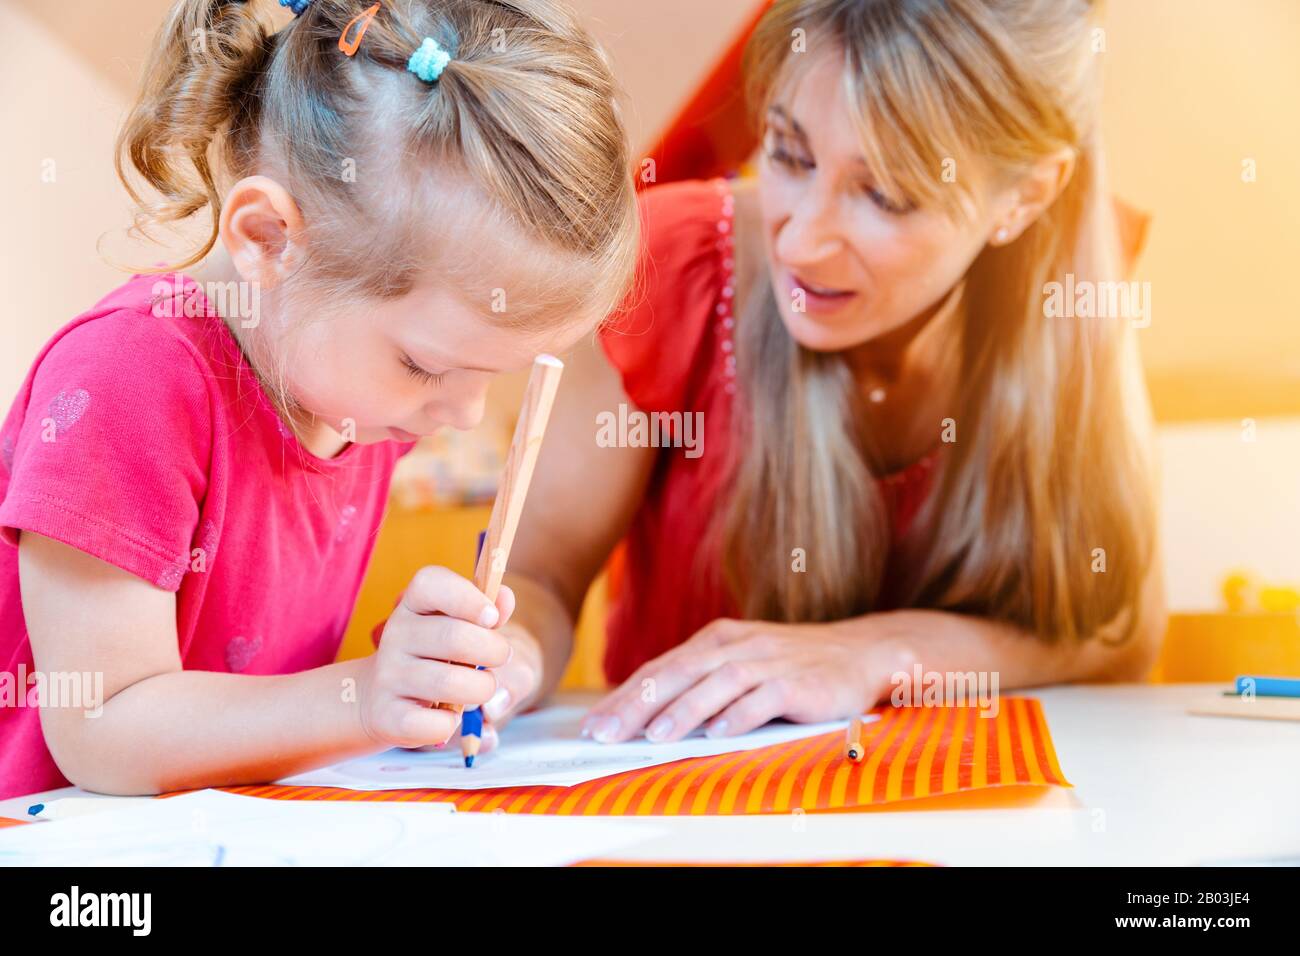 Children and play school teacher drawing together Stock Photo